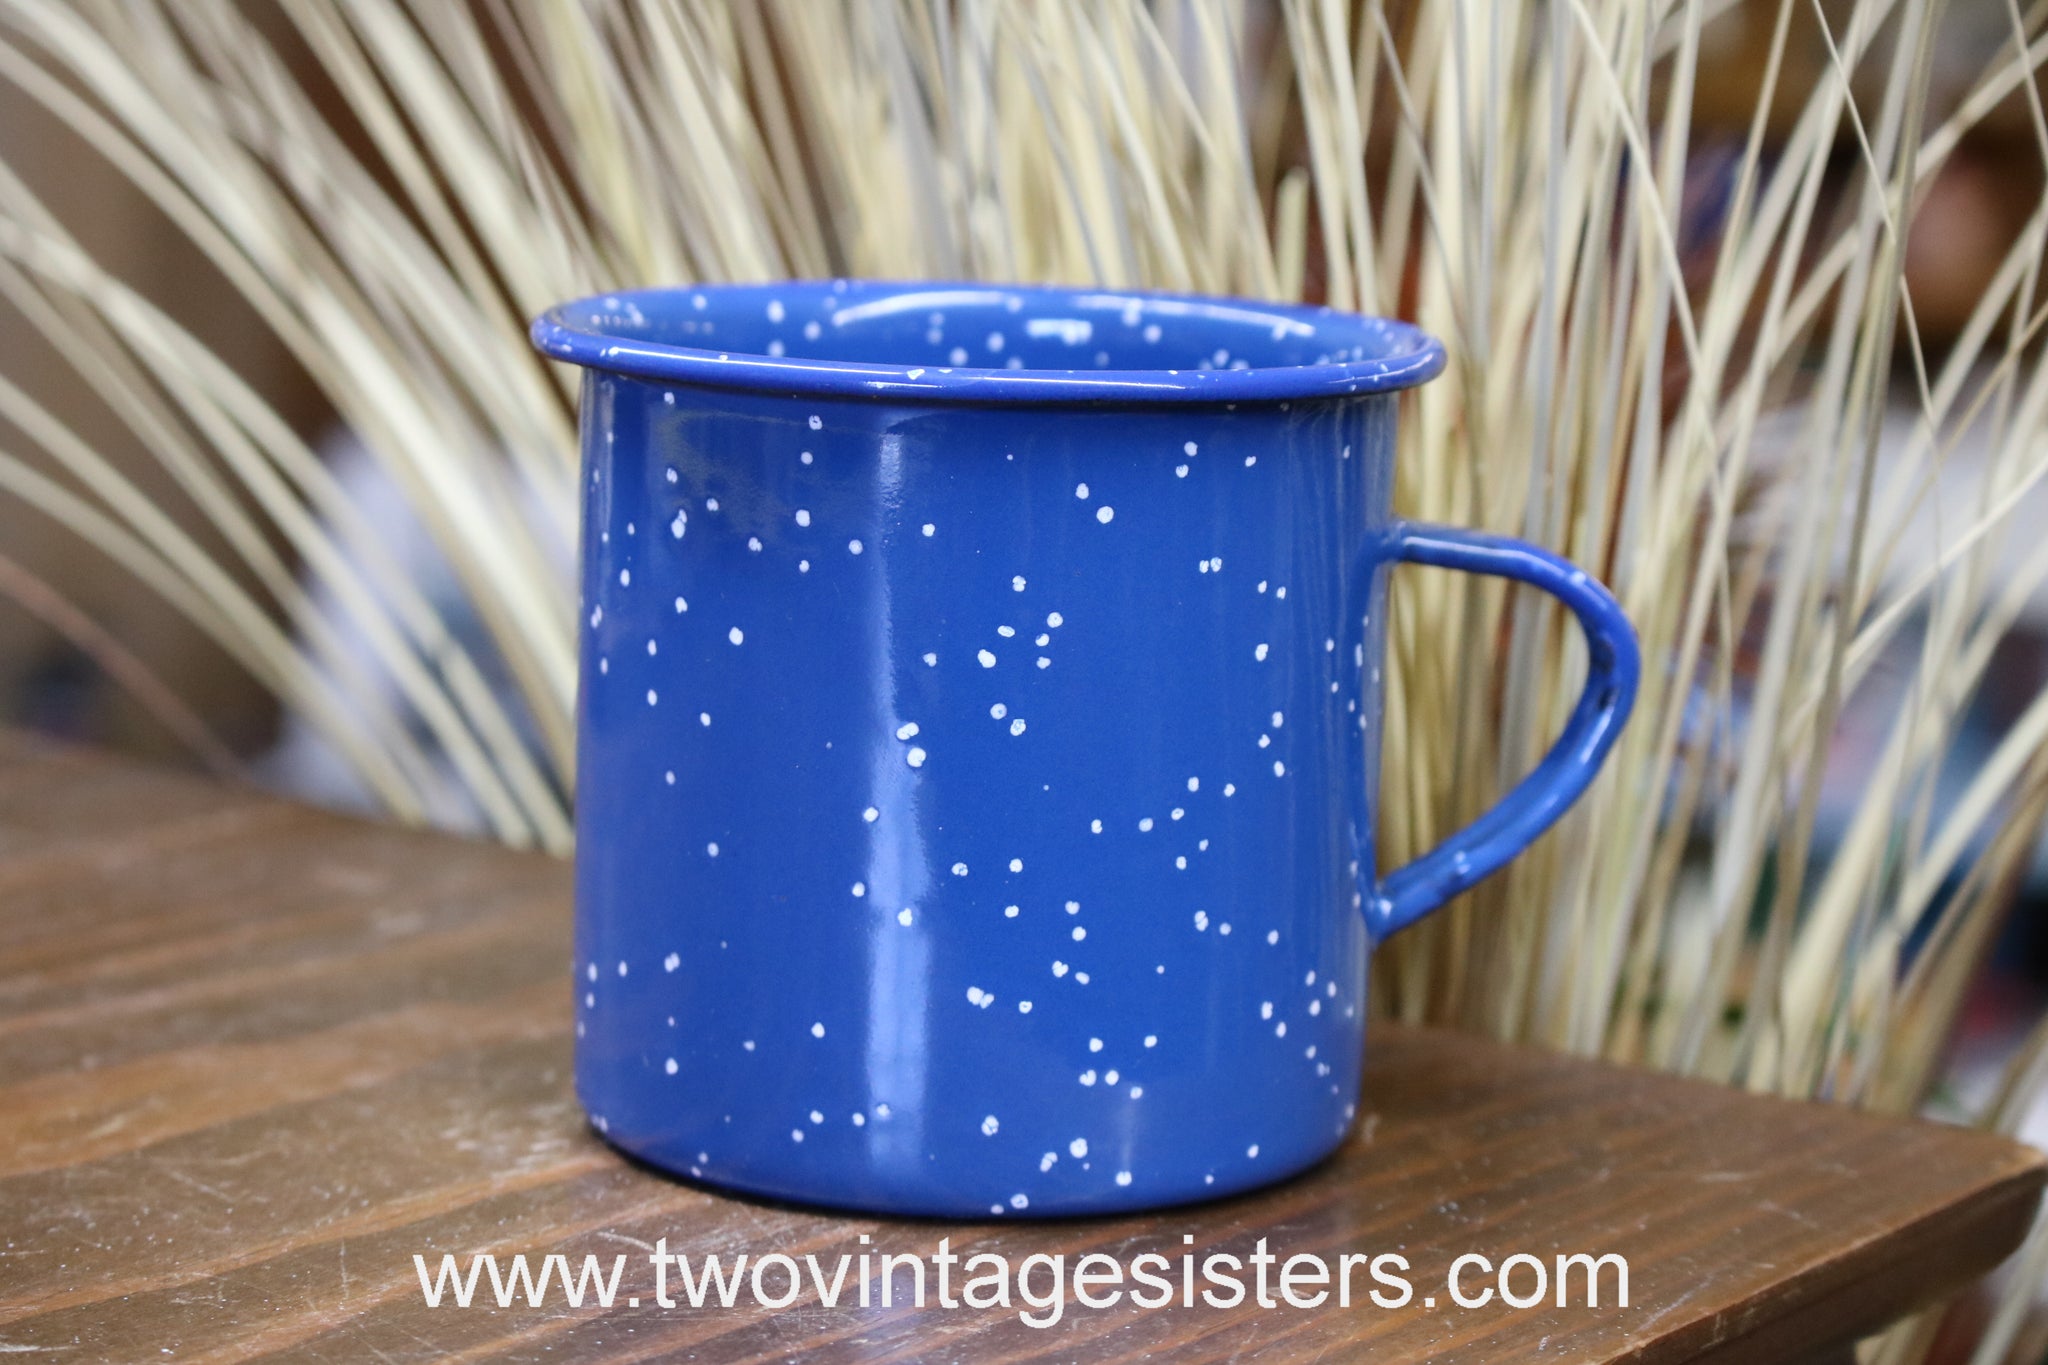 Blue Metal Camping Cup Mug. Blue with White Speckled Dots. Enamel.